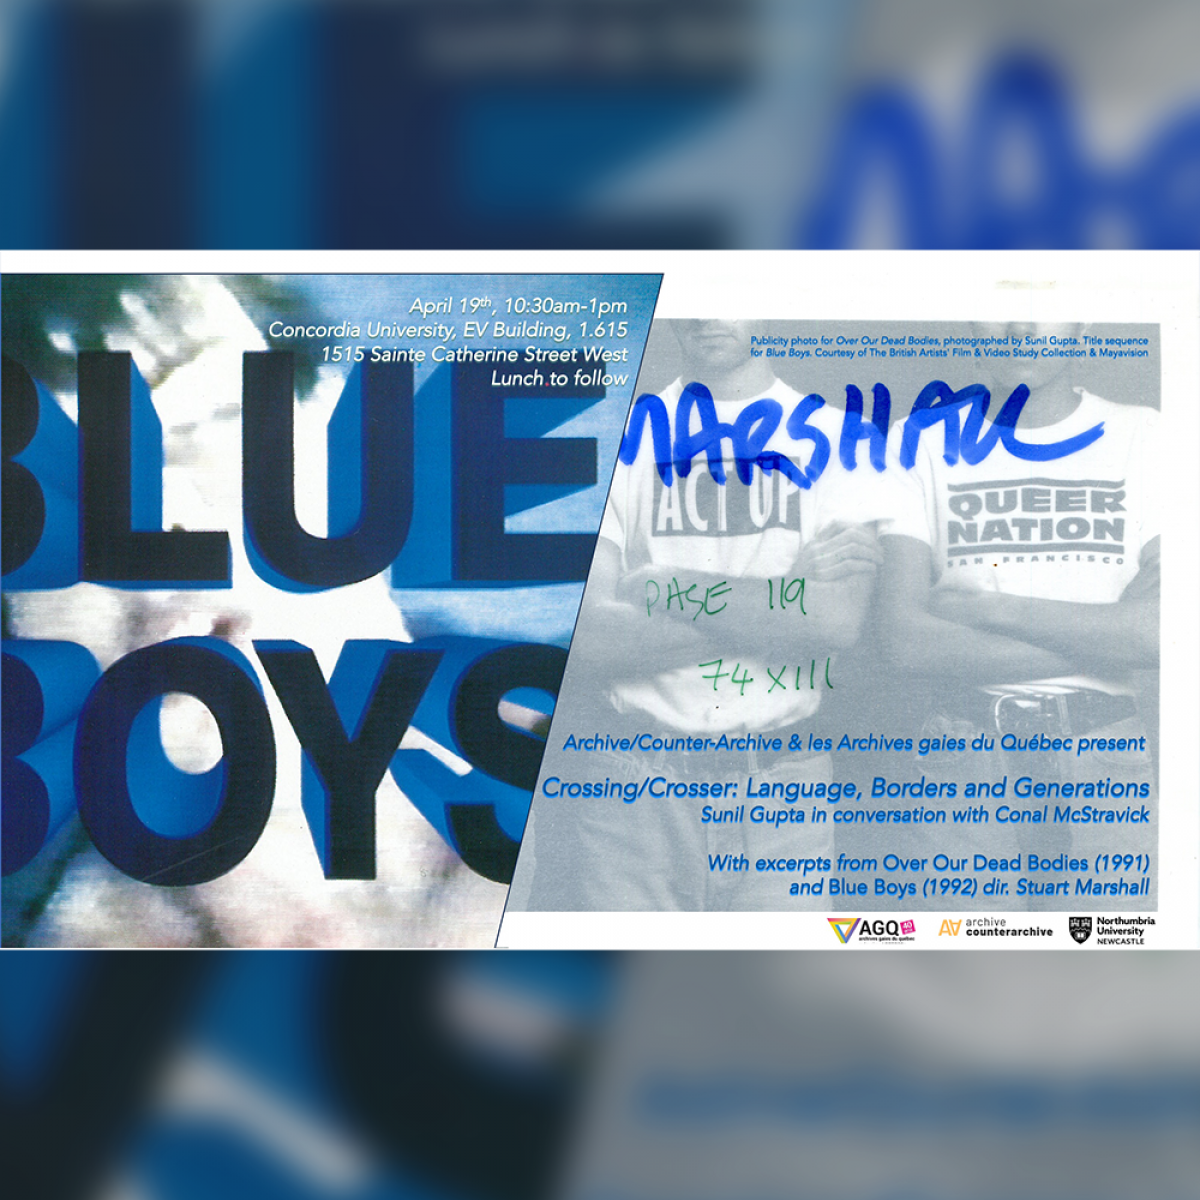 A square promotional image with a film still featuring the text "Blue Boys" on the left in block font and a photo of two men with crossed arms on the right. The word "Marshal" has been written over the photo on the right in blue marker.